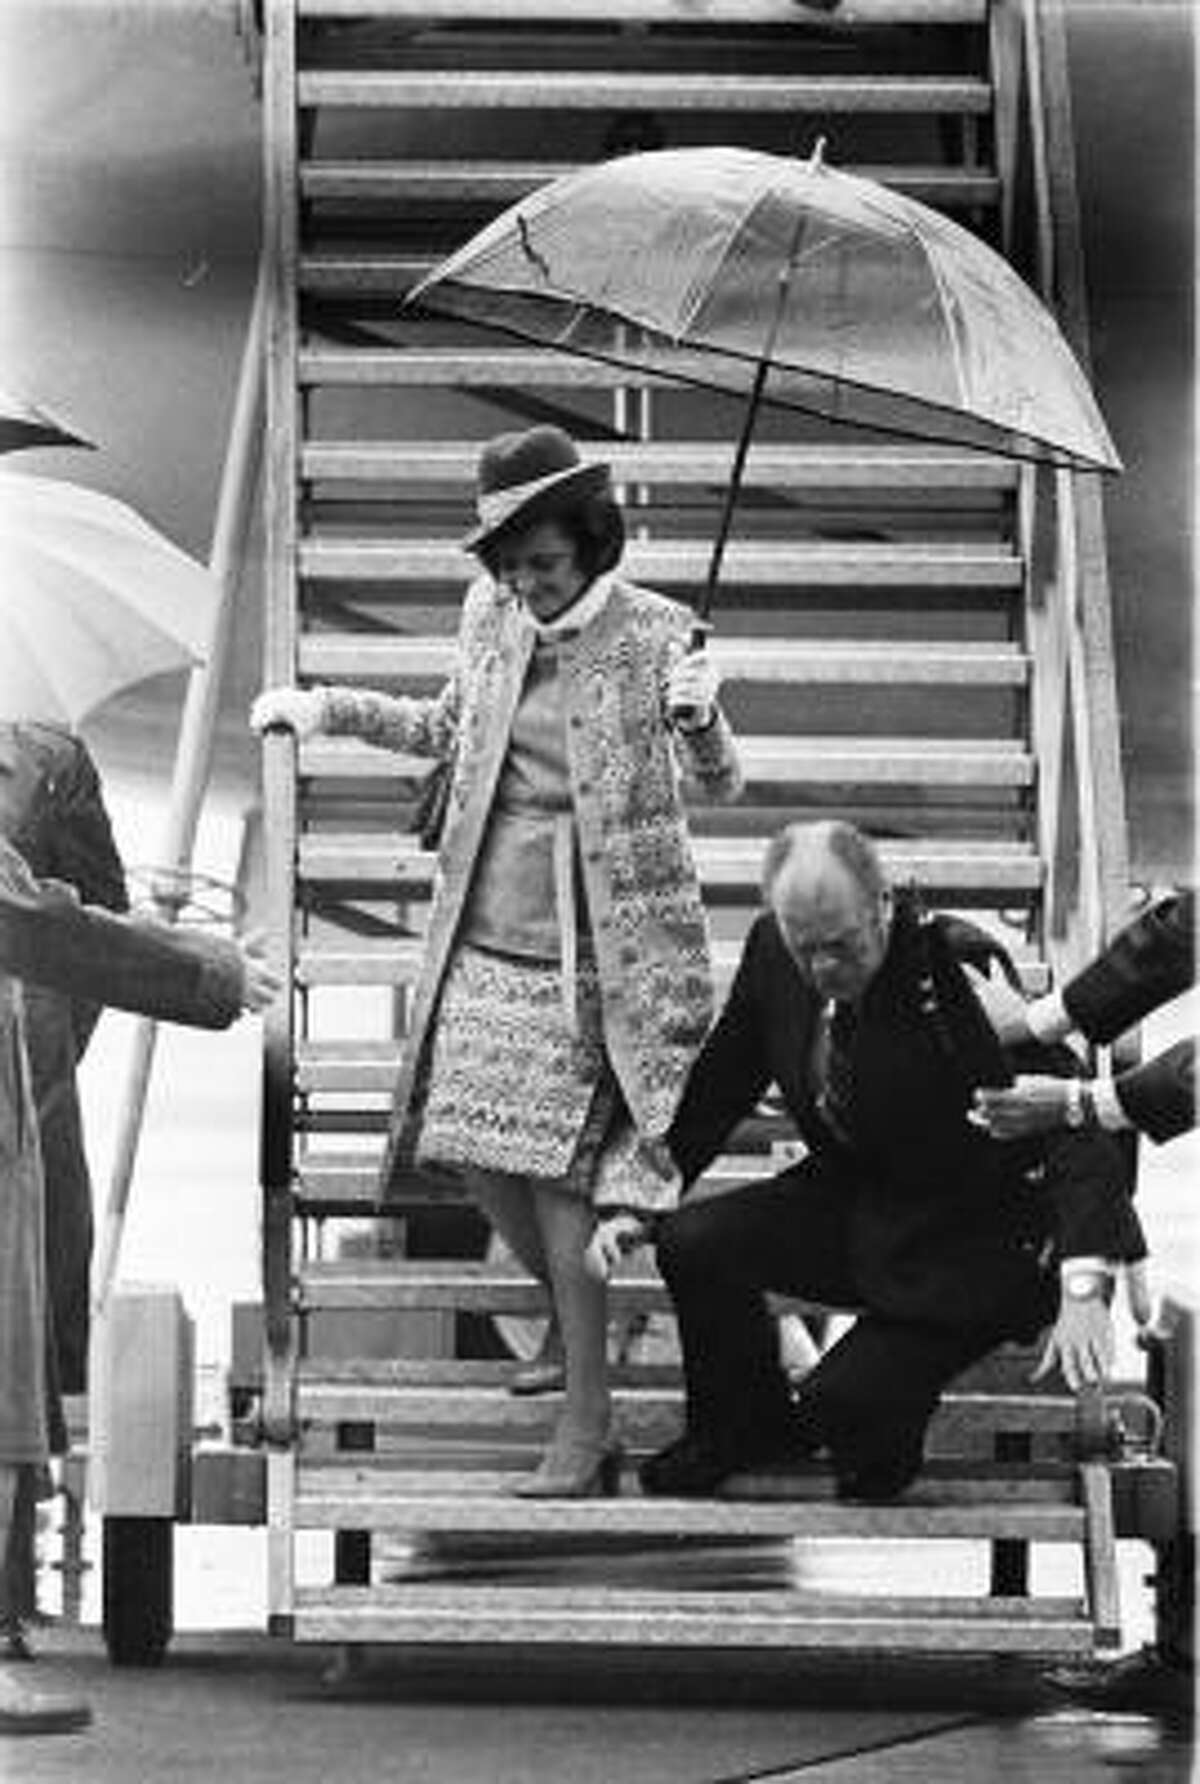 But you don't have to be a beauty pageant contestant to make headlines. President Gerald Ford hit the floor when he slipped on a wet ramp while disembarking from Air Force One in 1975.